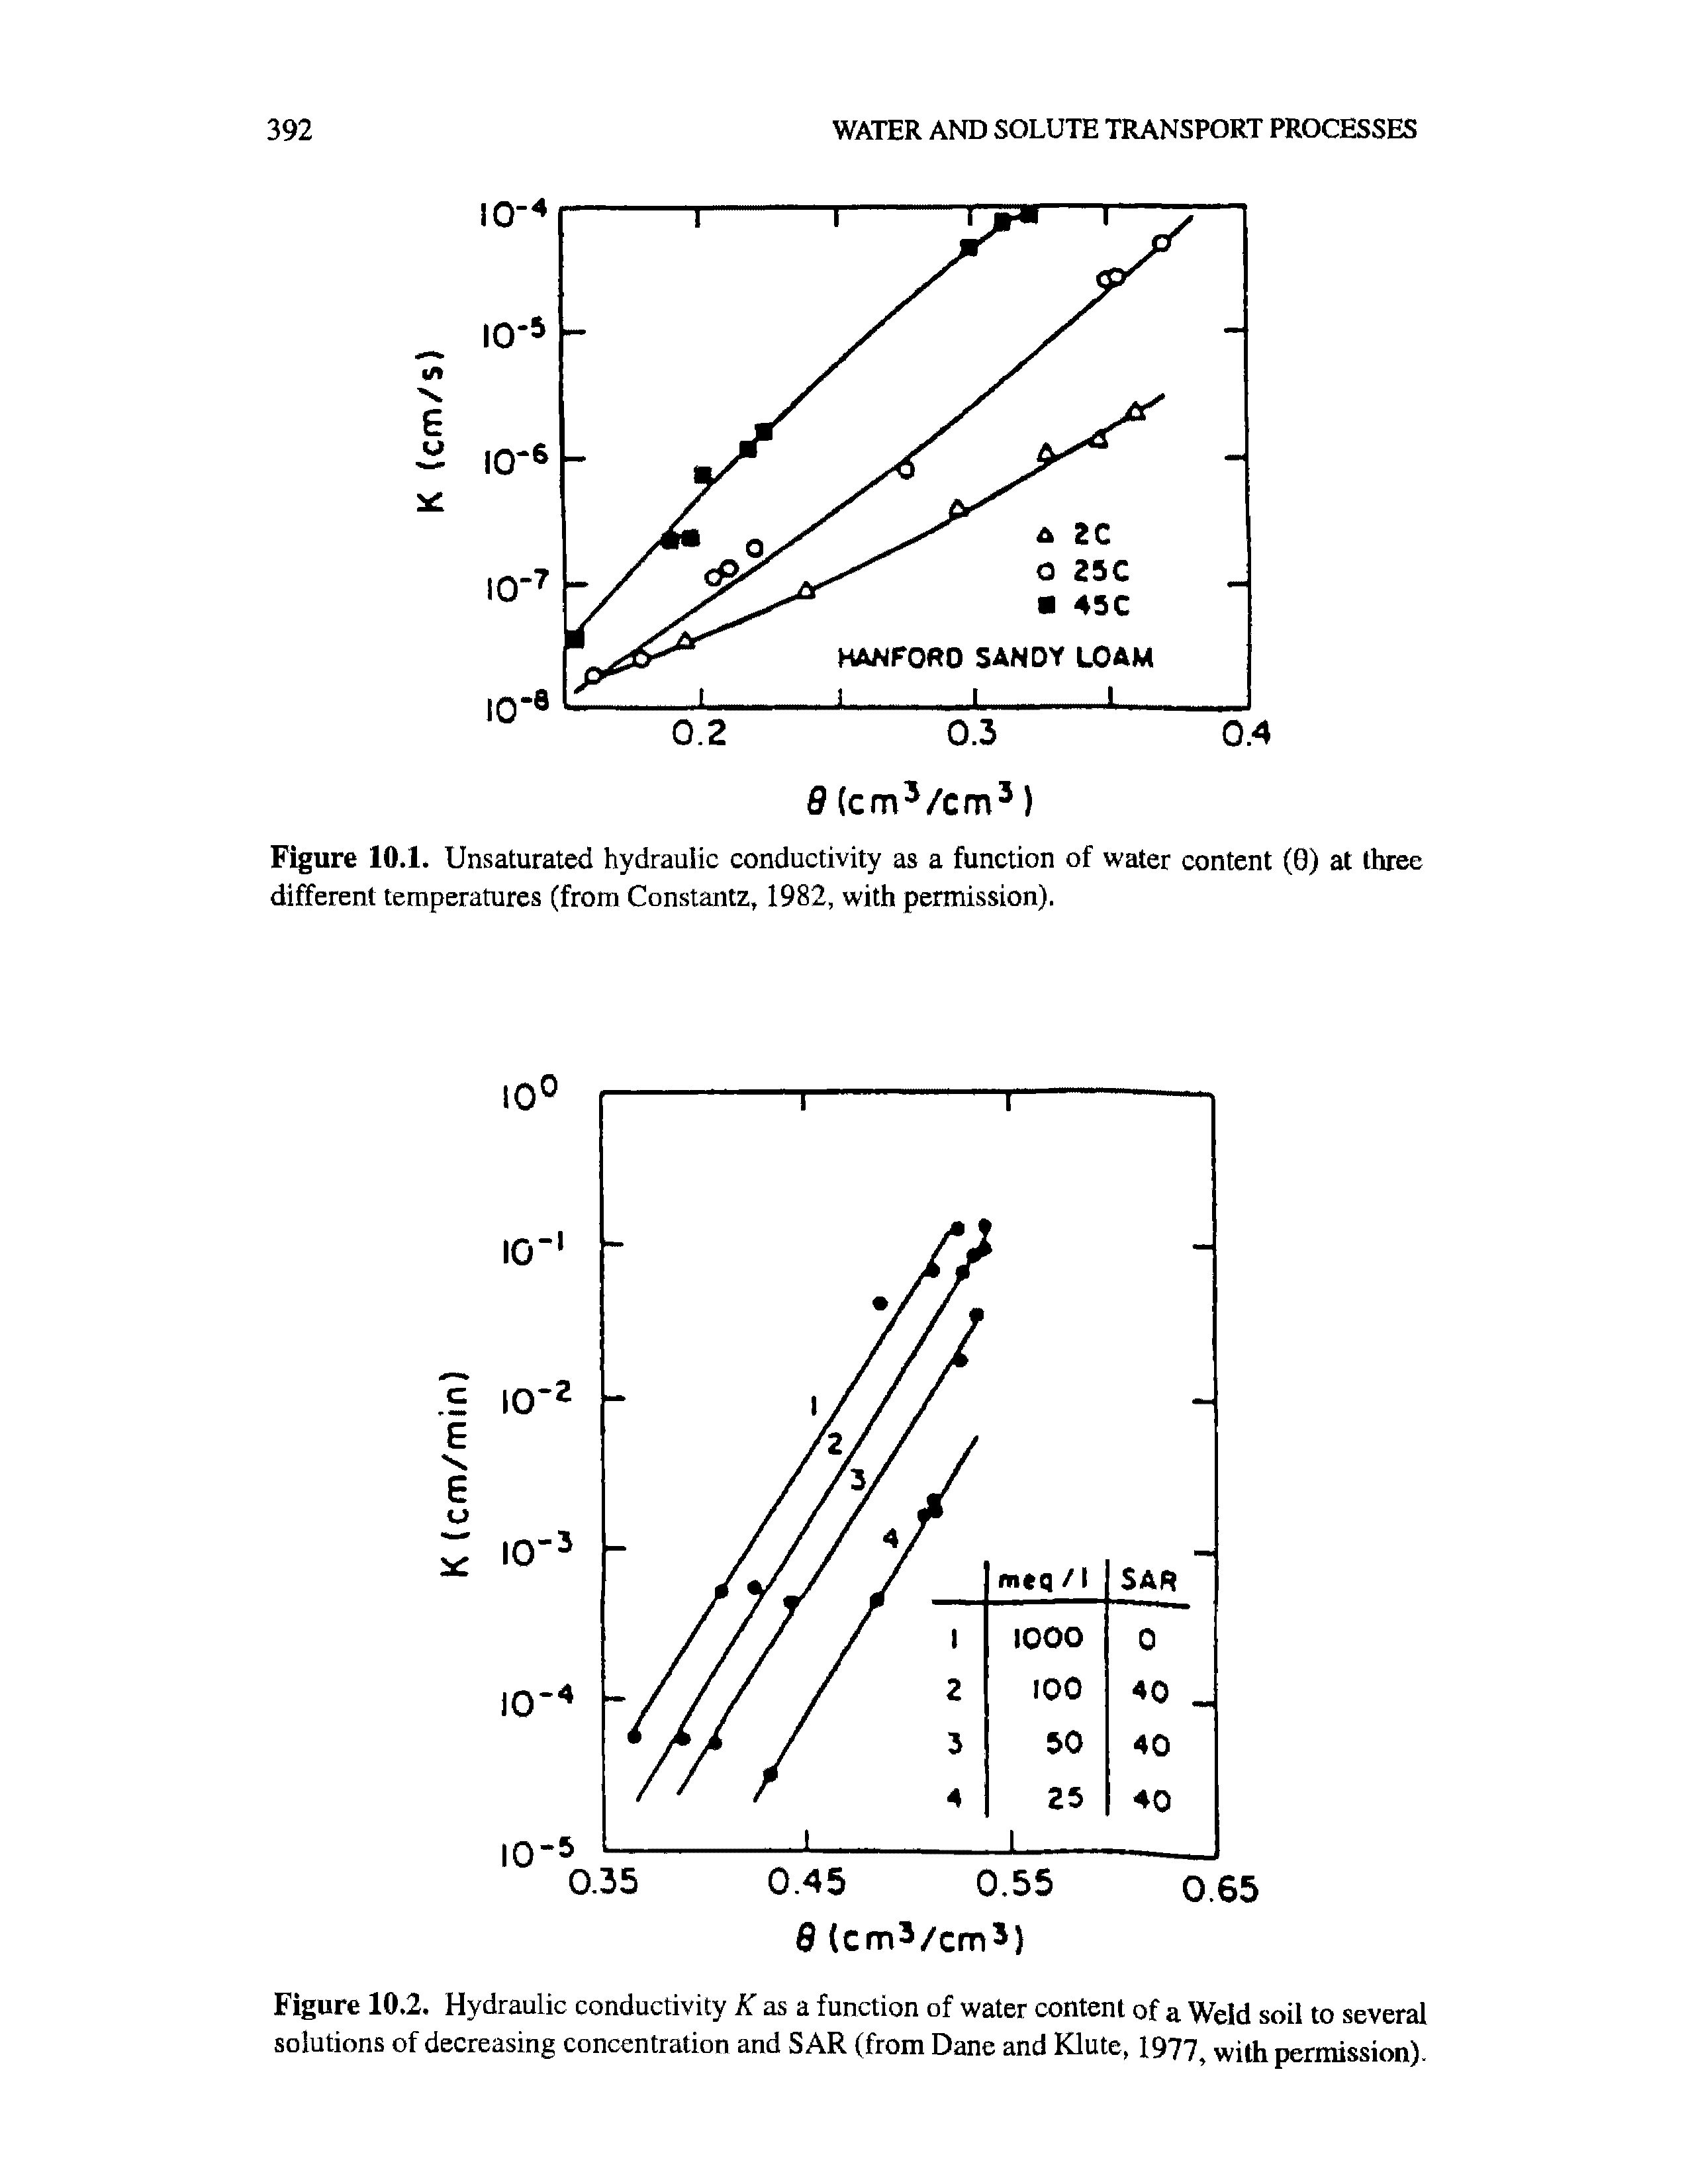 Figure 10.1. Unsaturated hydraulic conductivity as a function of water content (0) at three different temperatures (from Constantz, 1982, with permission).